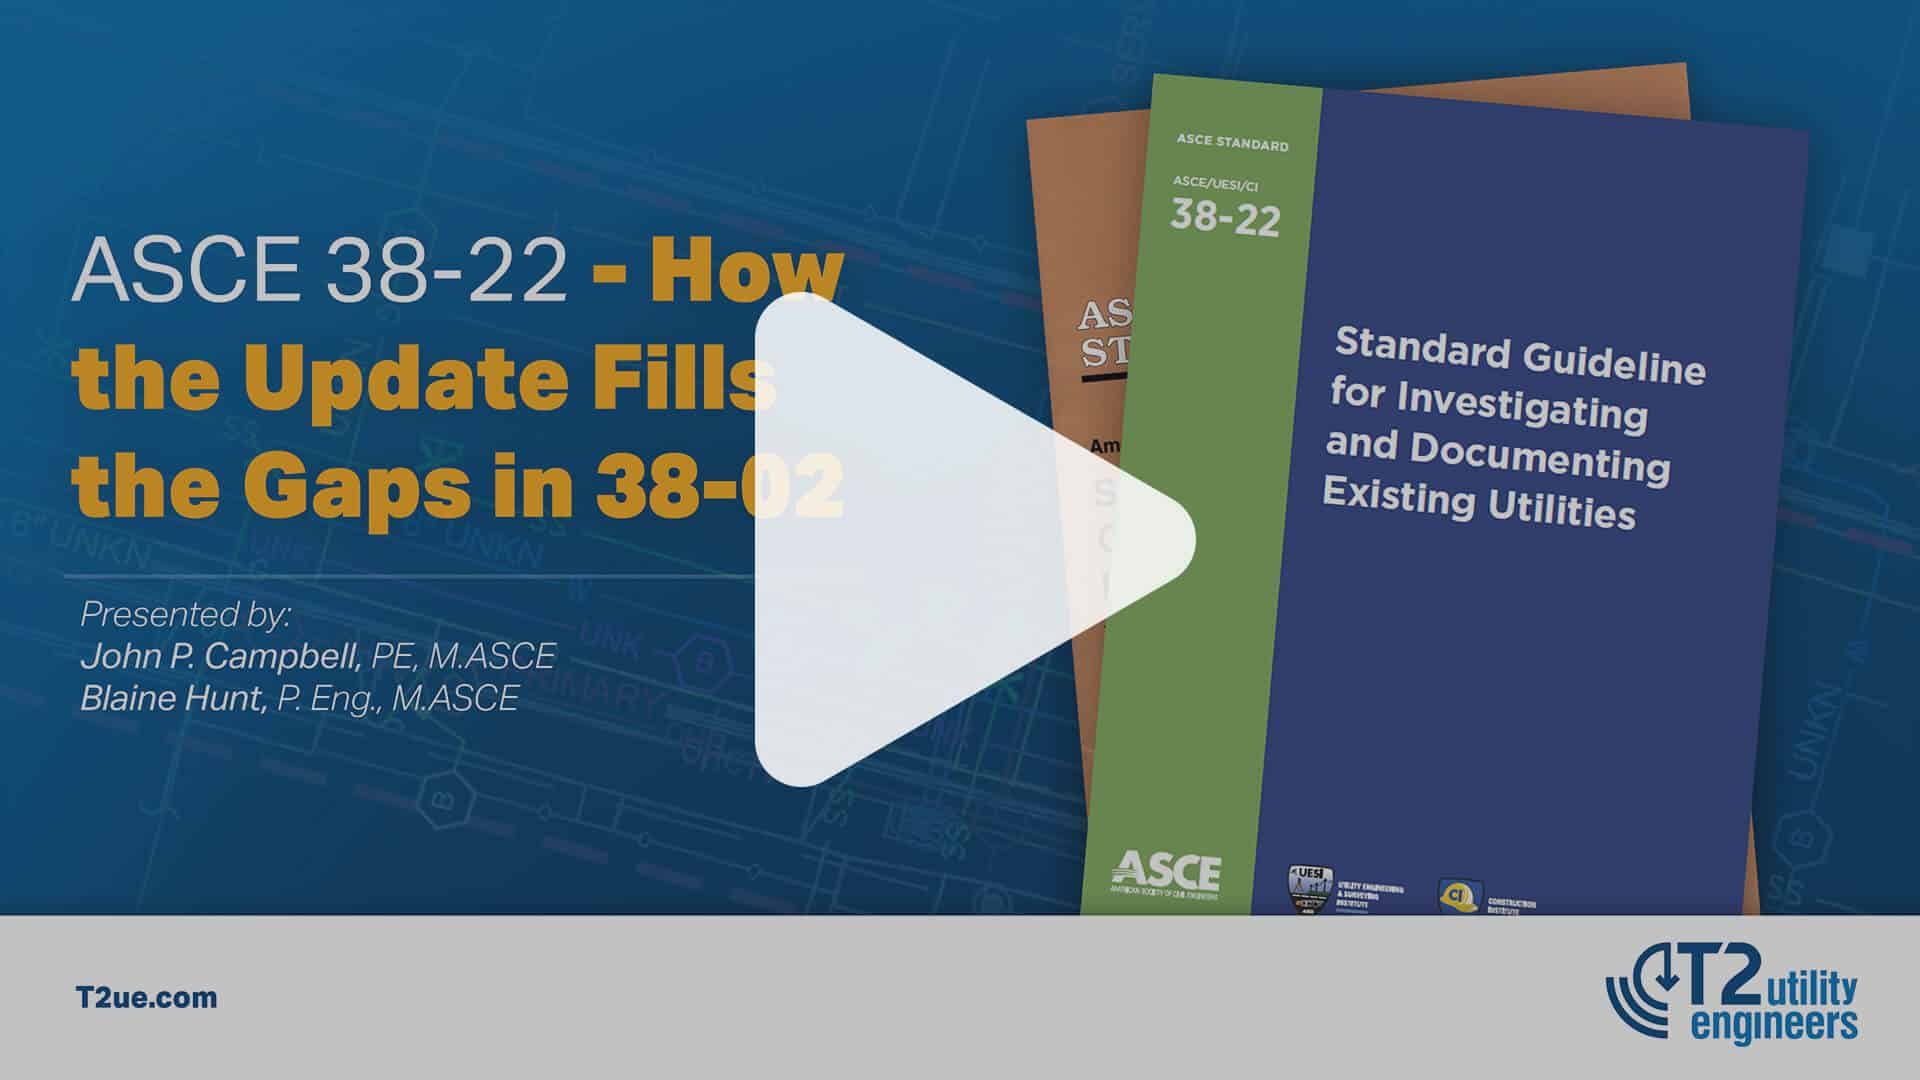 asce-38-22-how-the-update-fills-the-gaps